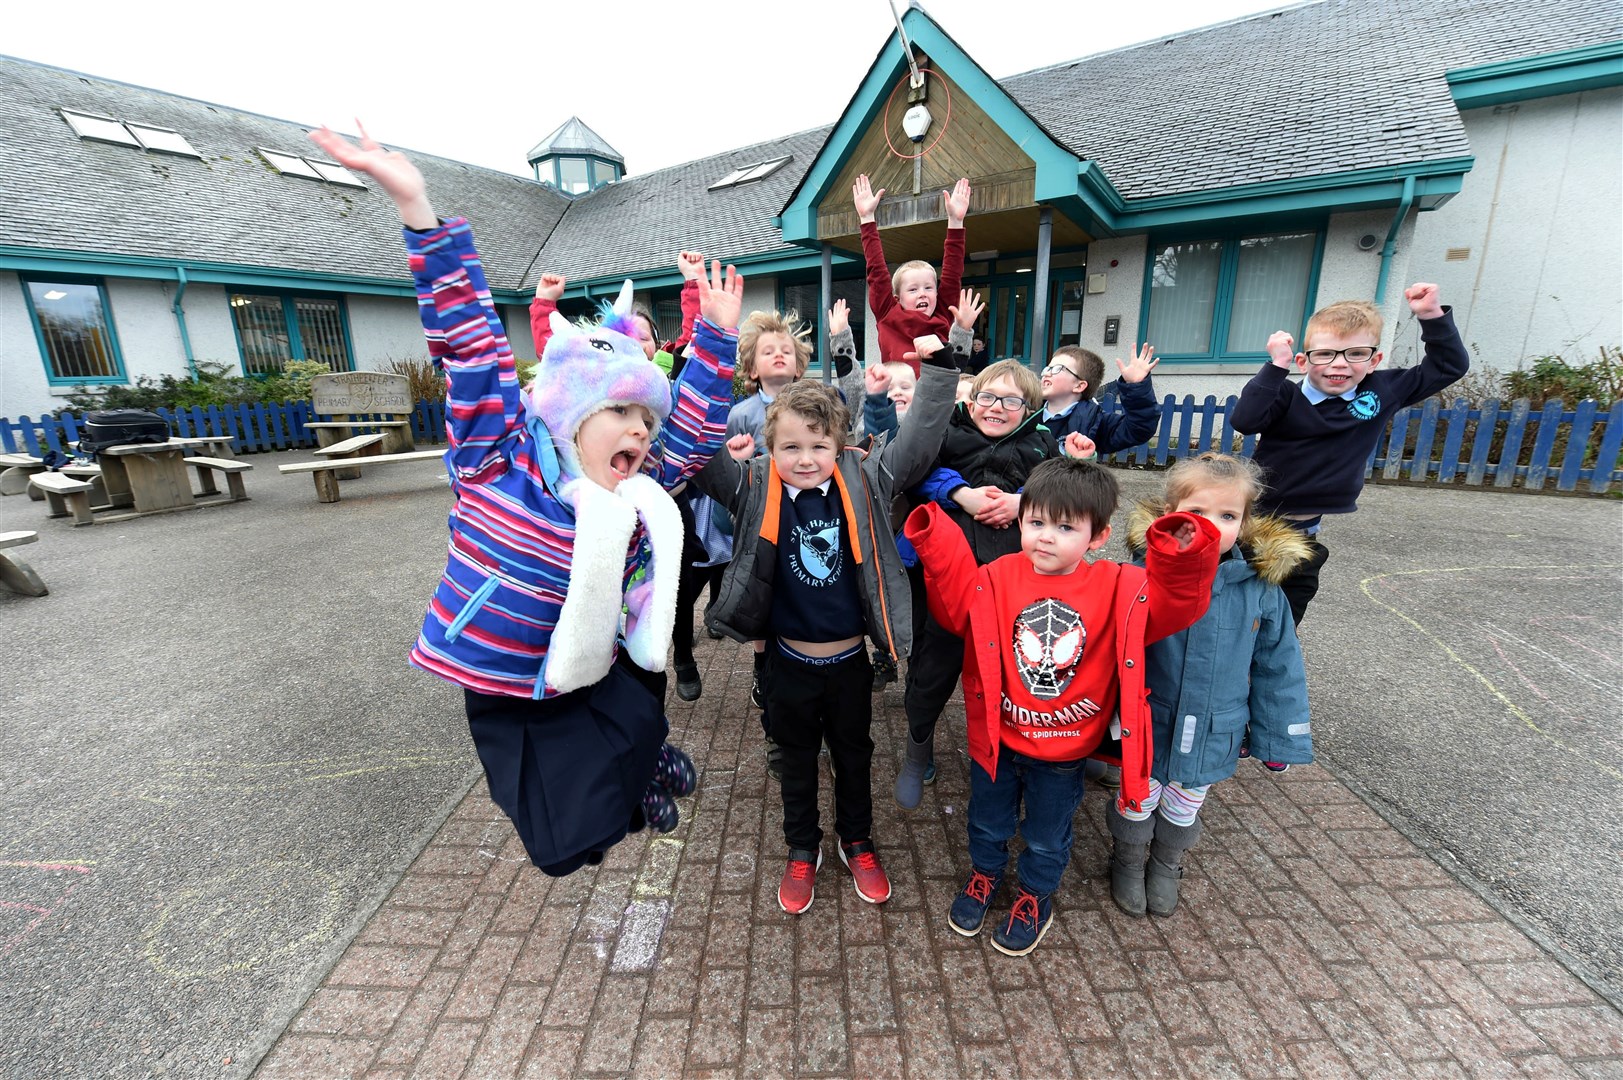 Jumping for joy: Strathpeffer Primary School children react to the news. Picture: Callum Mackay